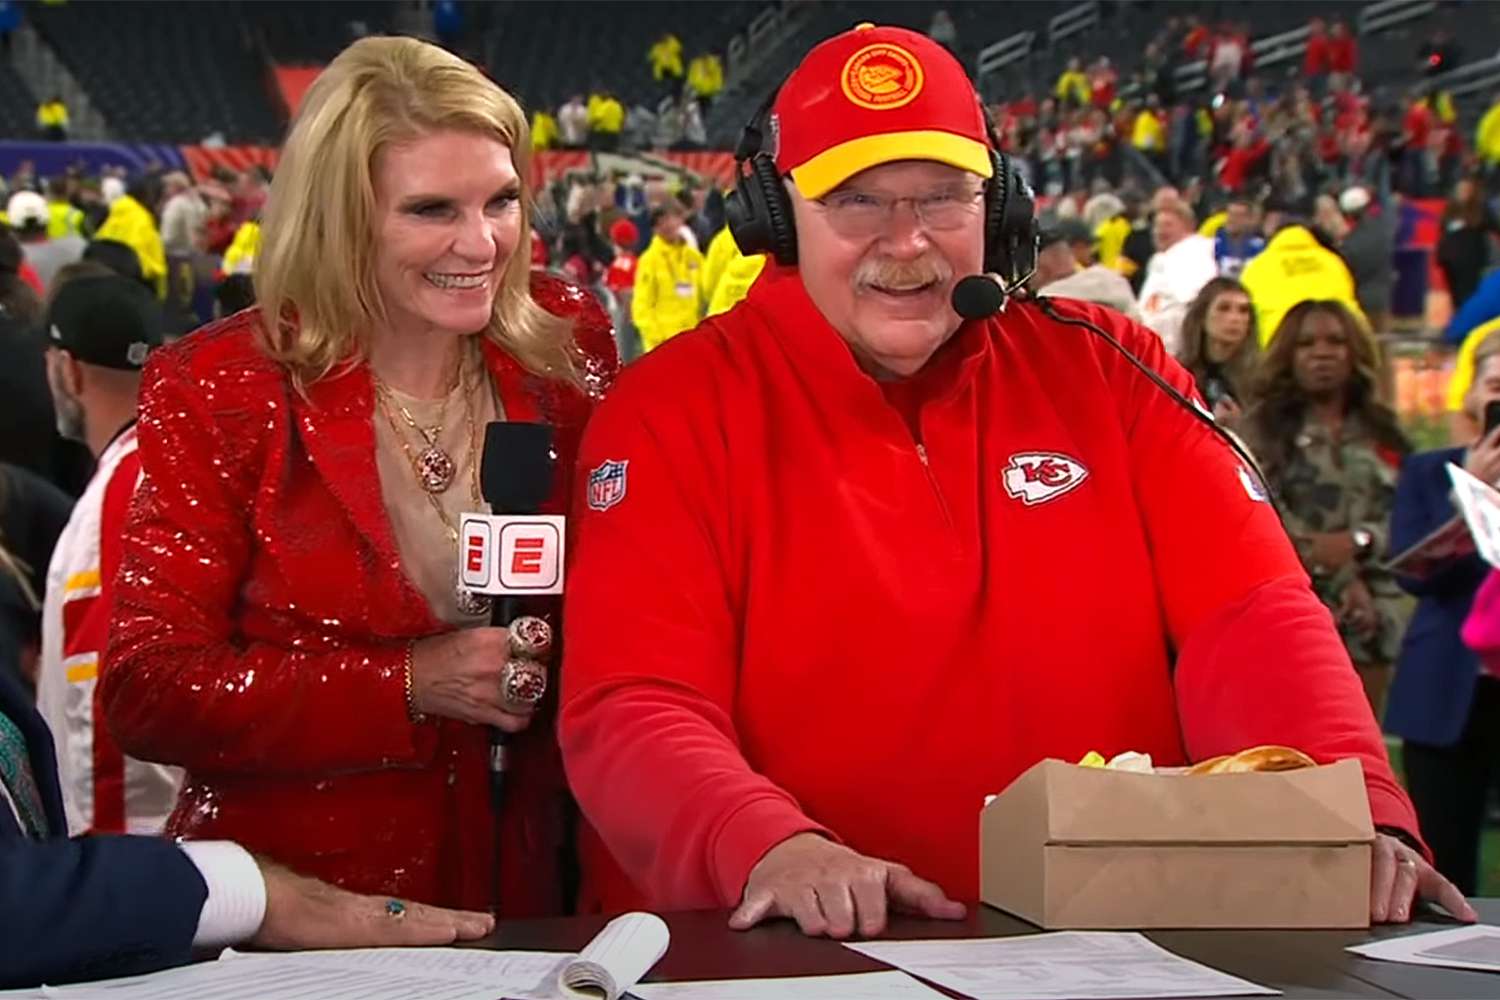 NFL News: How Does Kansas City Chiefs’ Andy Reid View The Impact Of The Major NFL Rule Change?